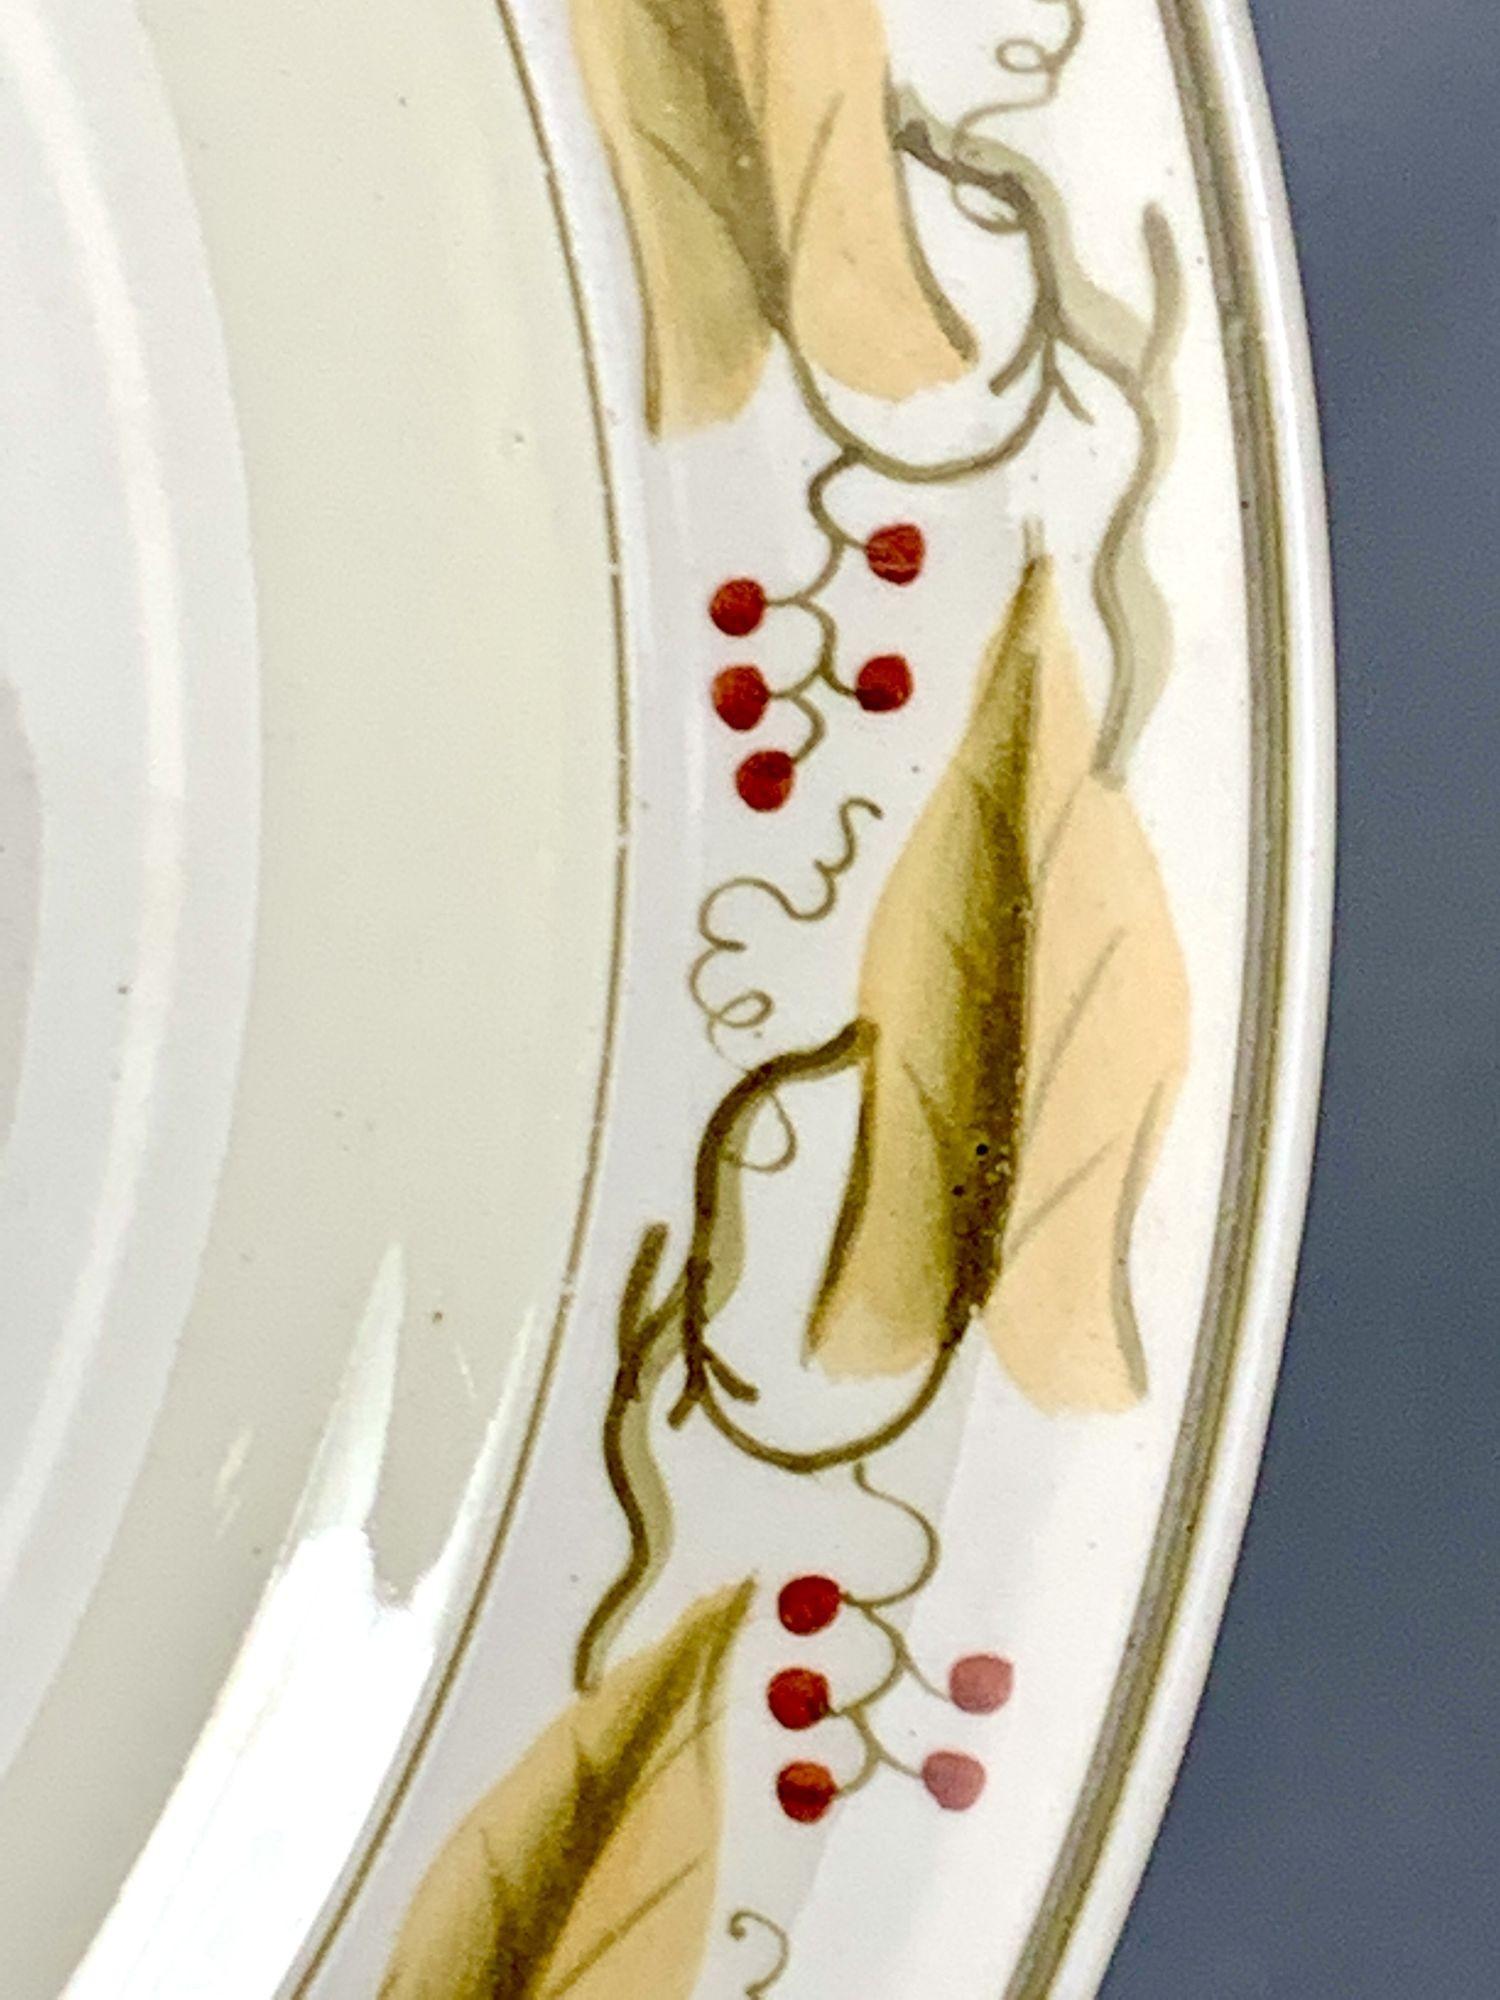 Made in 1904, the border design on this set of Wedgwood dinner dishes was inspired by designs in Josiah Wedgwood's mid-18th century First Pattern Book.
The red berries and beige leaves on the vine combine perfectly with the creamy color of the